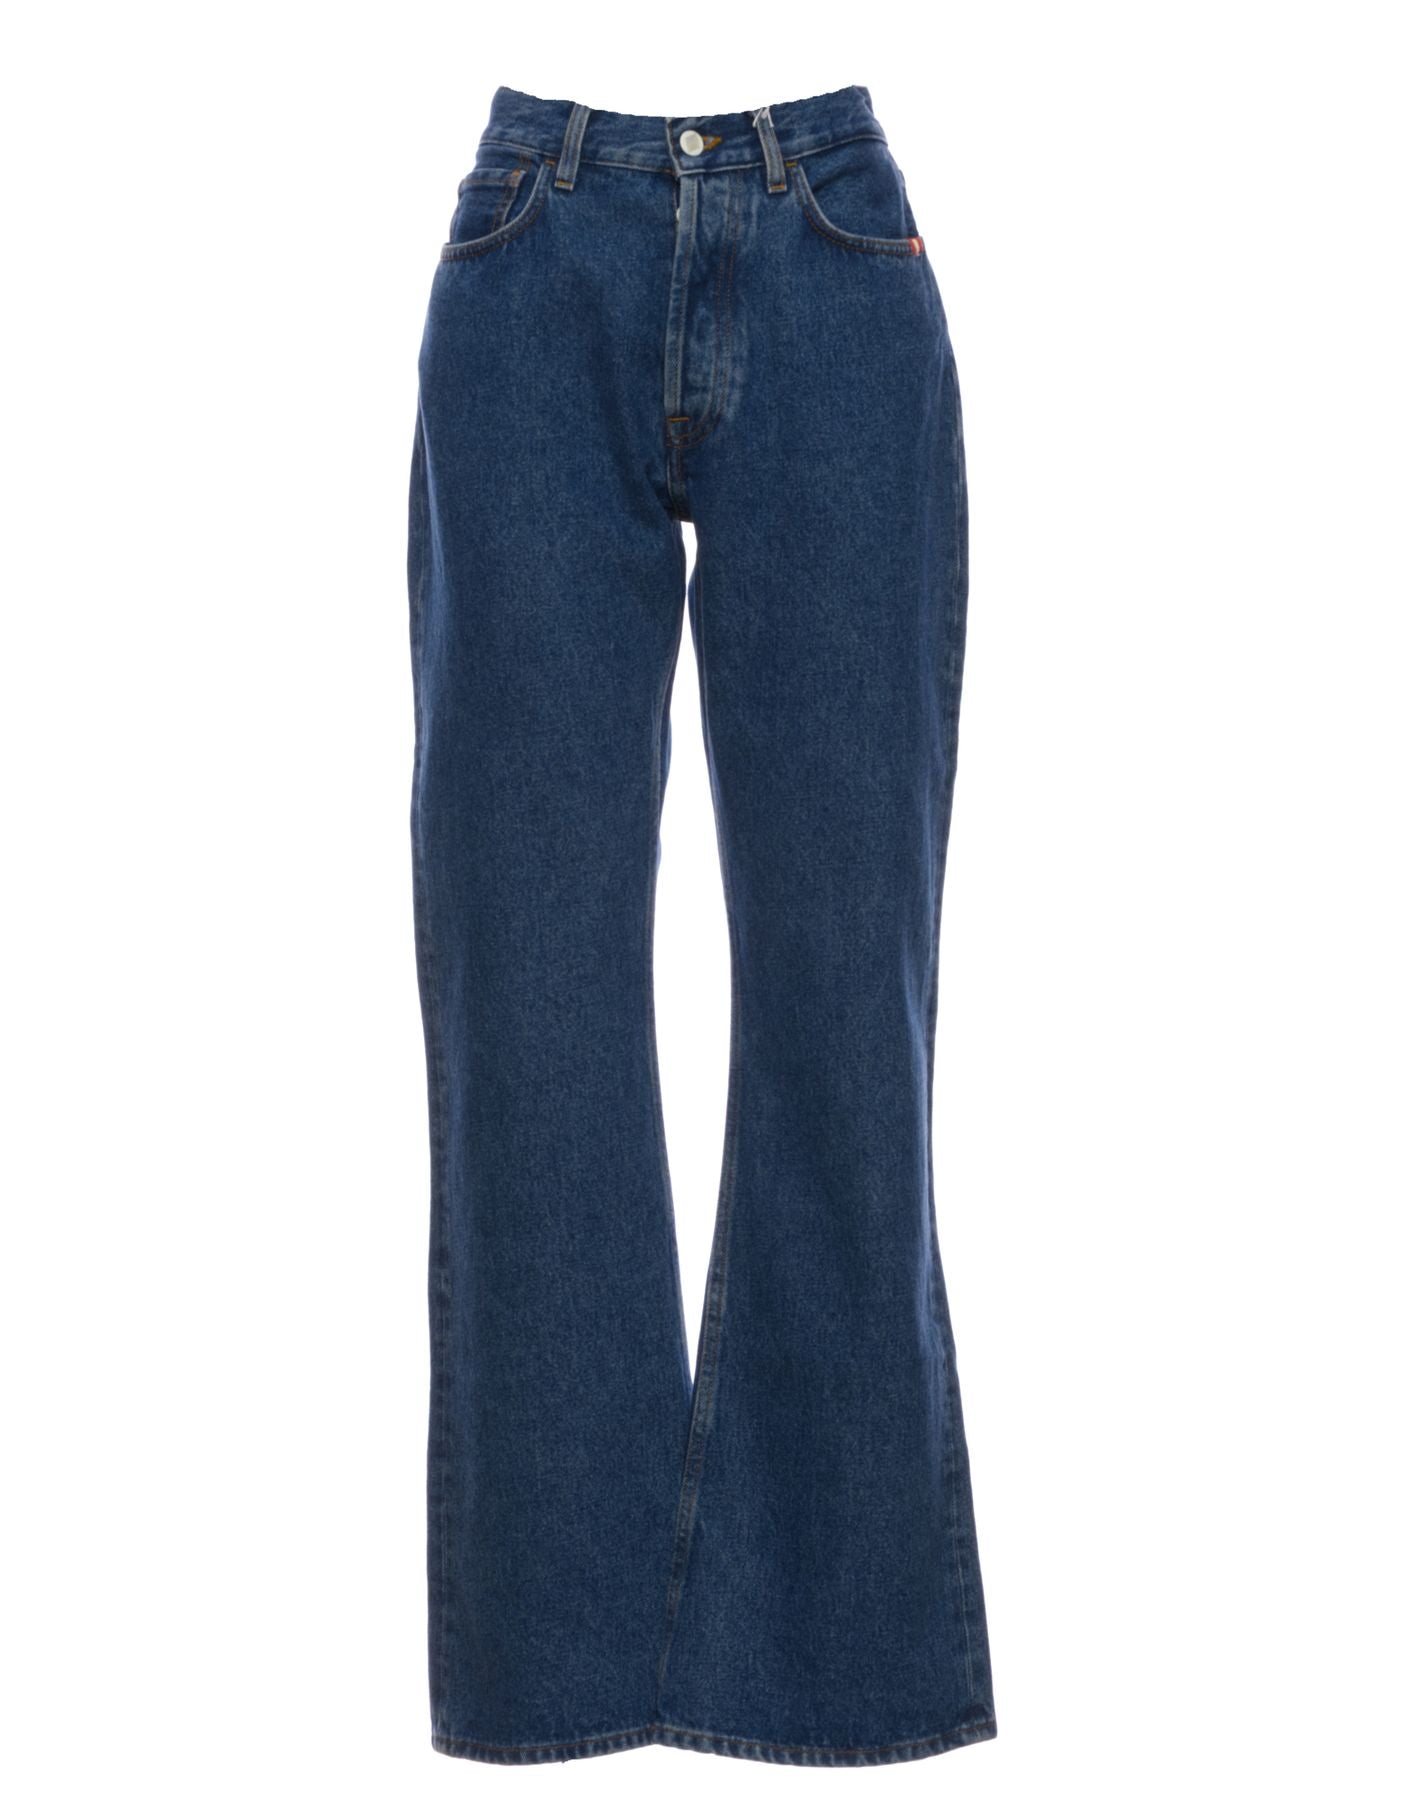 Jeans for women AMISH A21AMD007D4351770 999